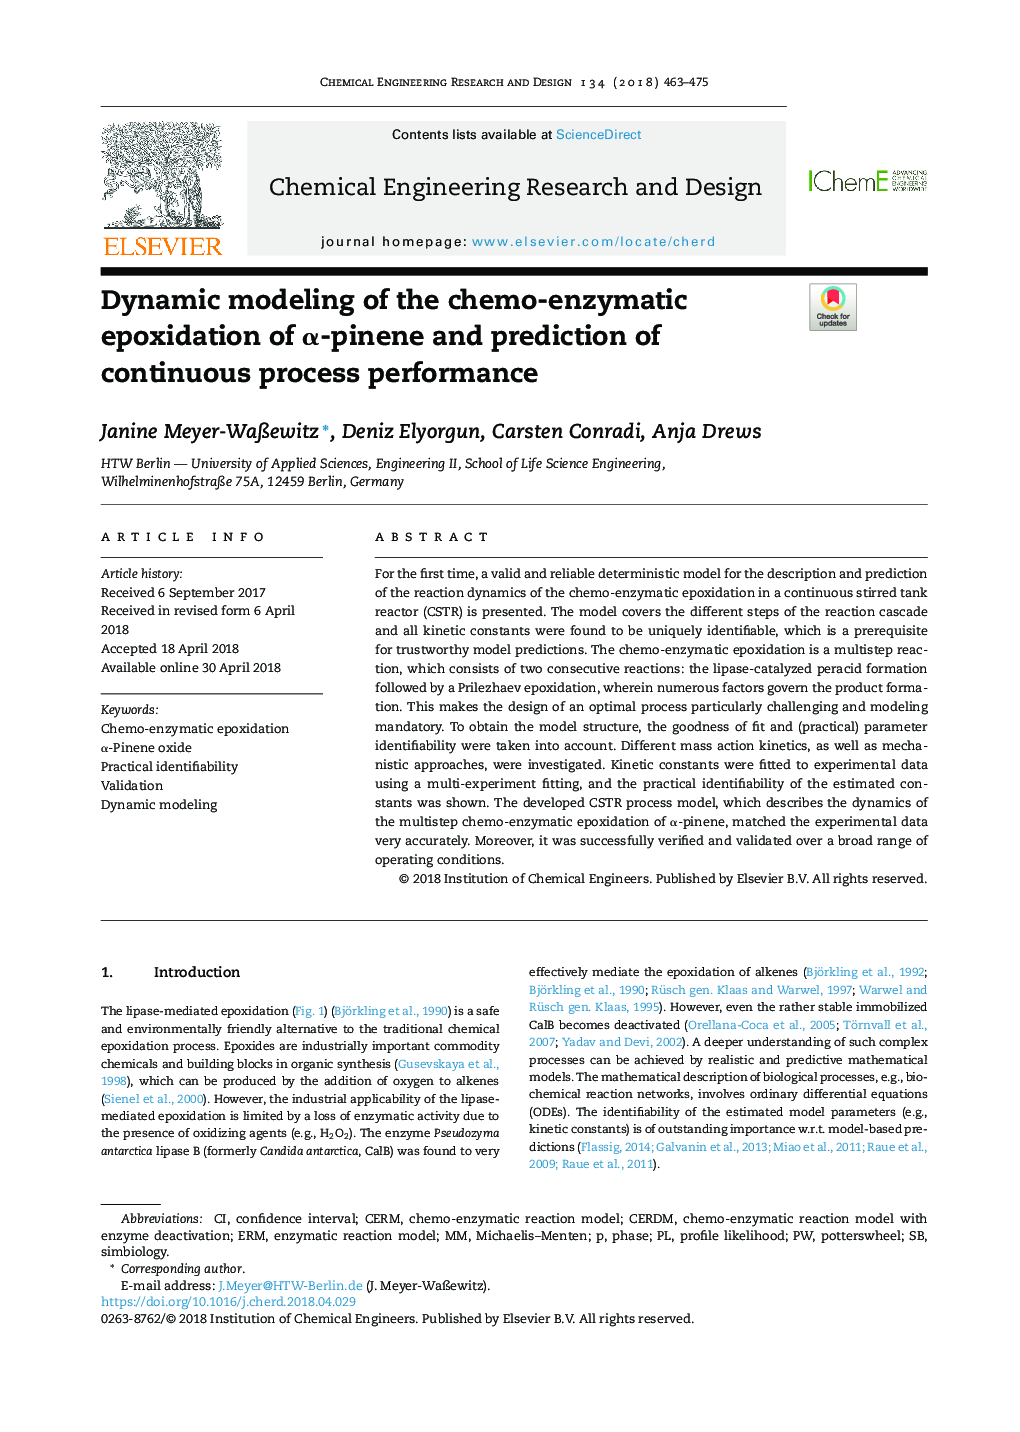 Dynamic modeling of the chemo-enzymatic epoxidation of Î±-pinene and prediction of continuous process performance